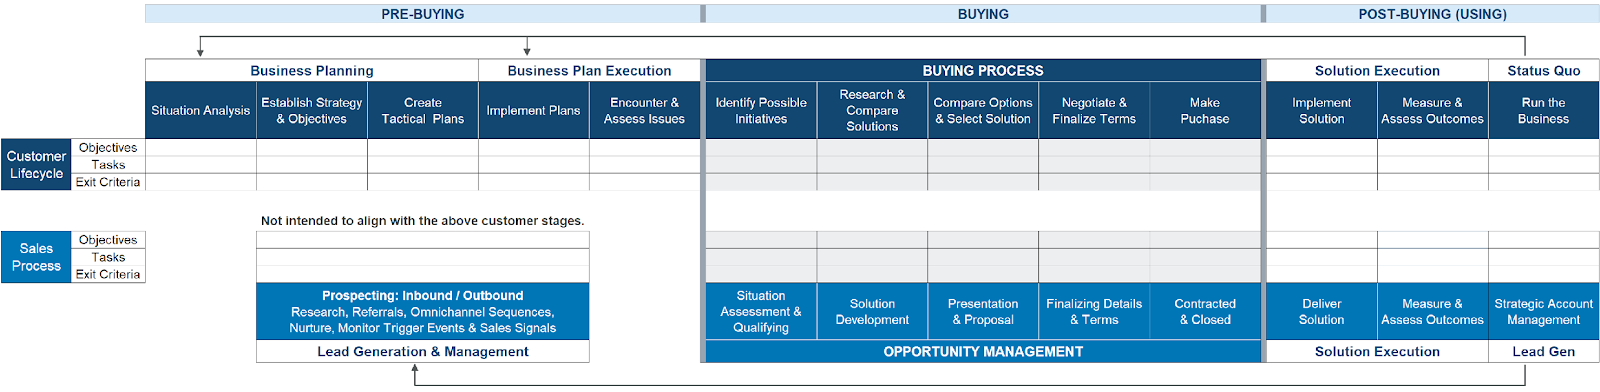 buying-sales-process-example